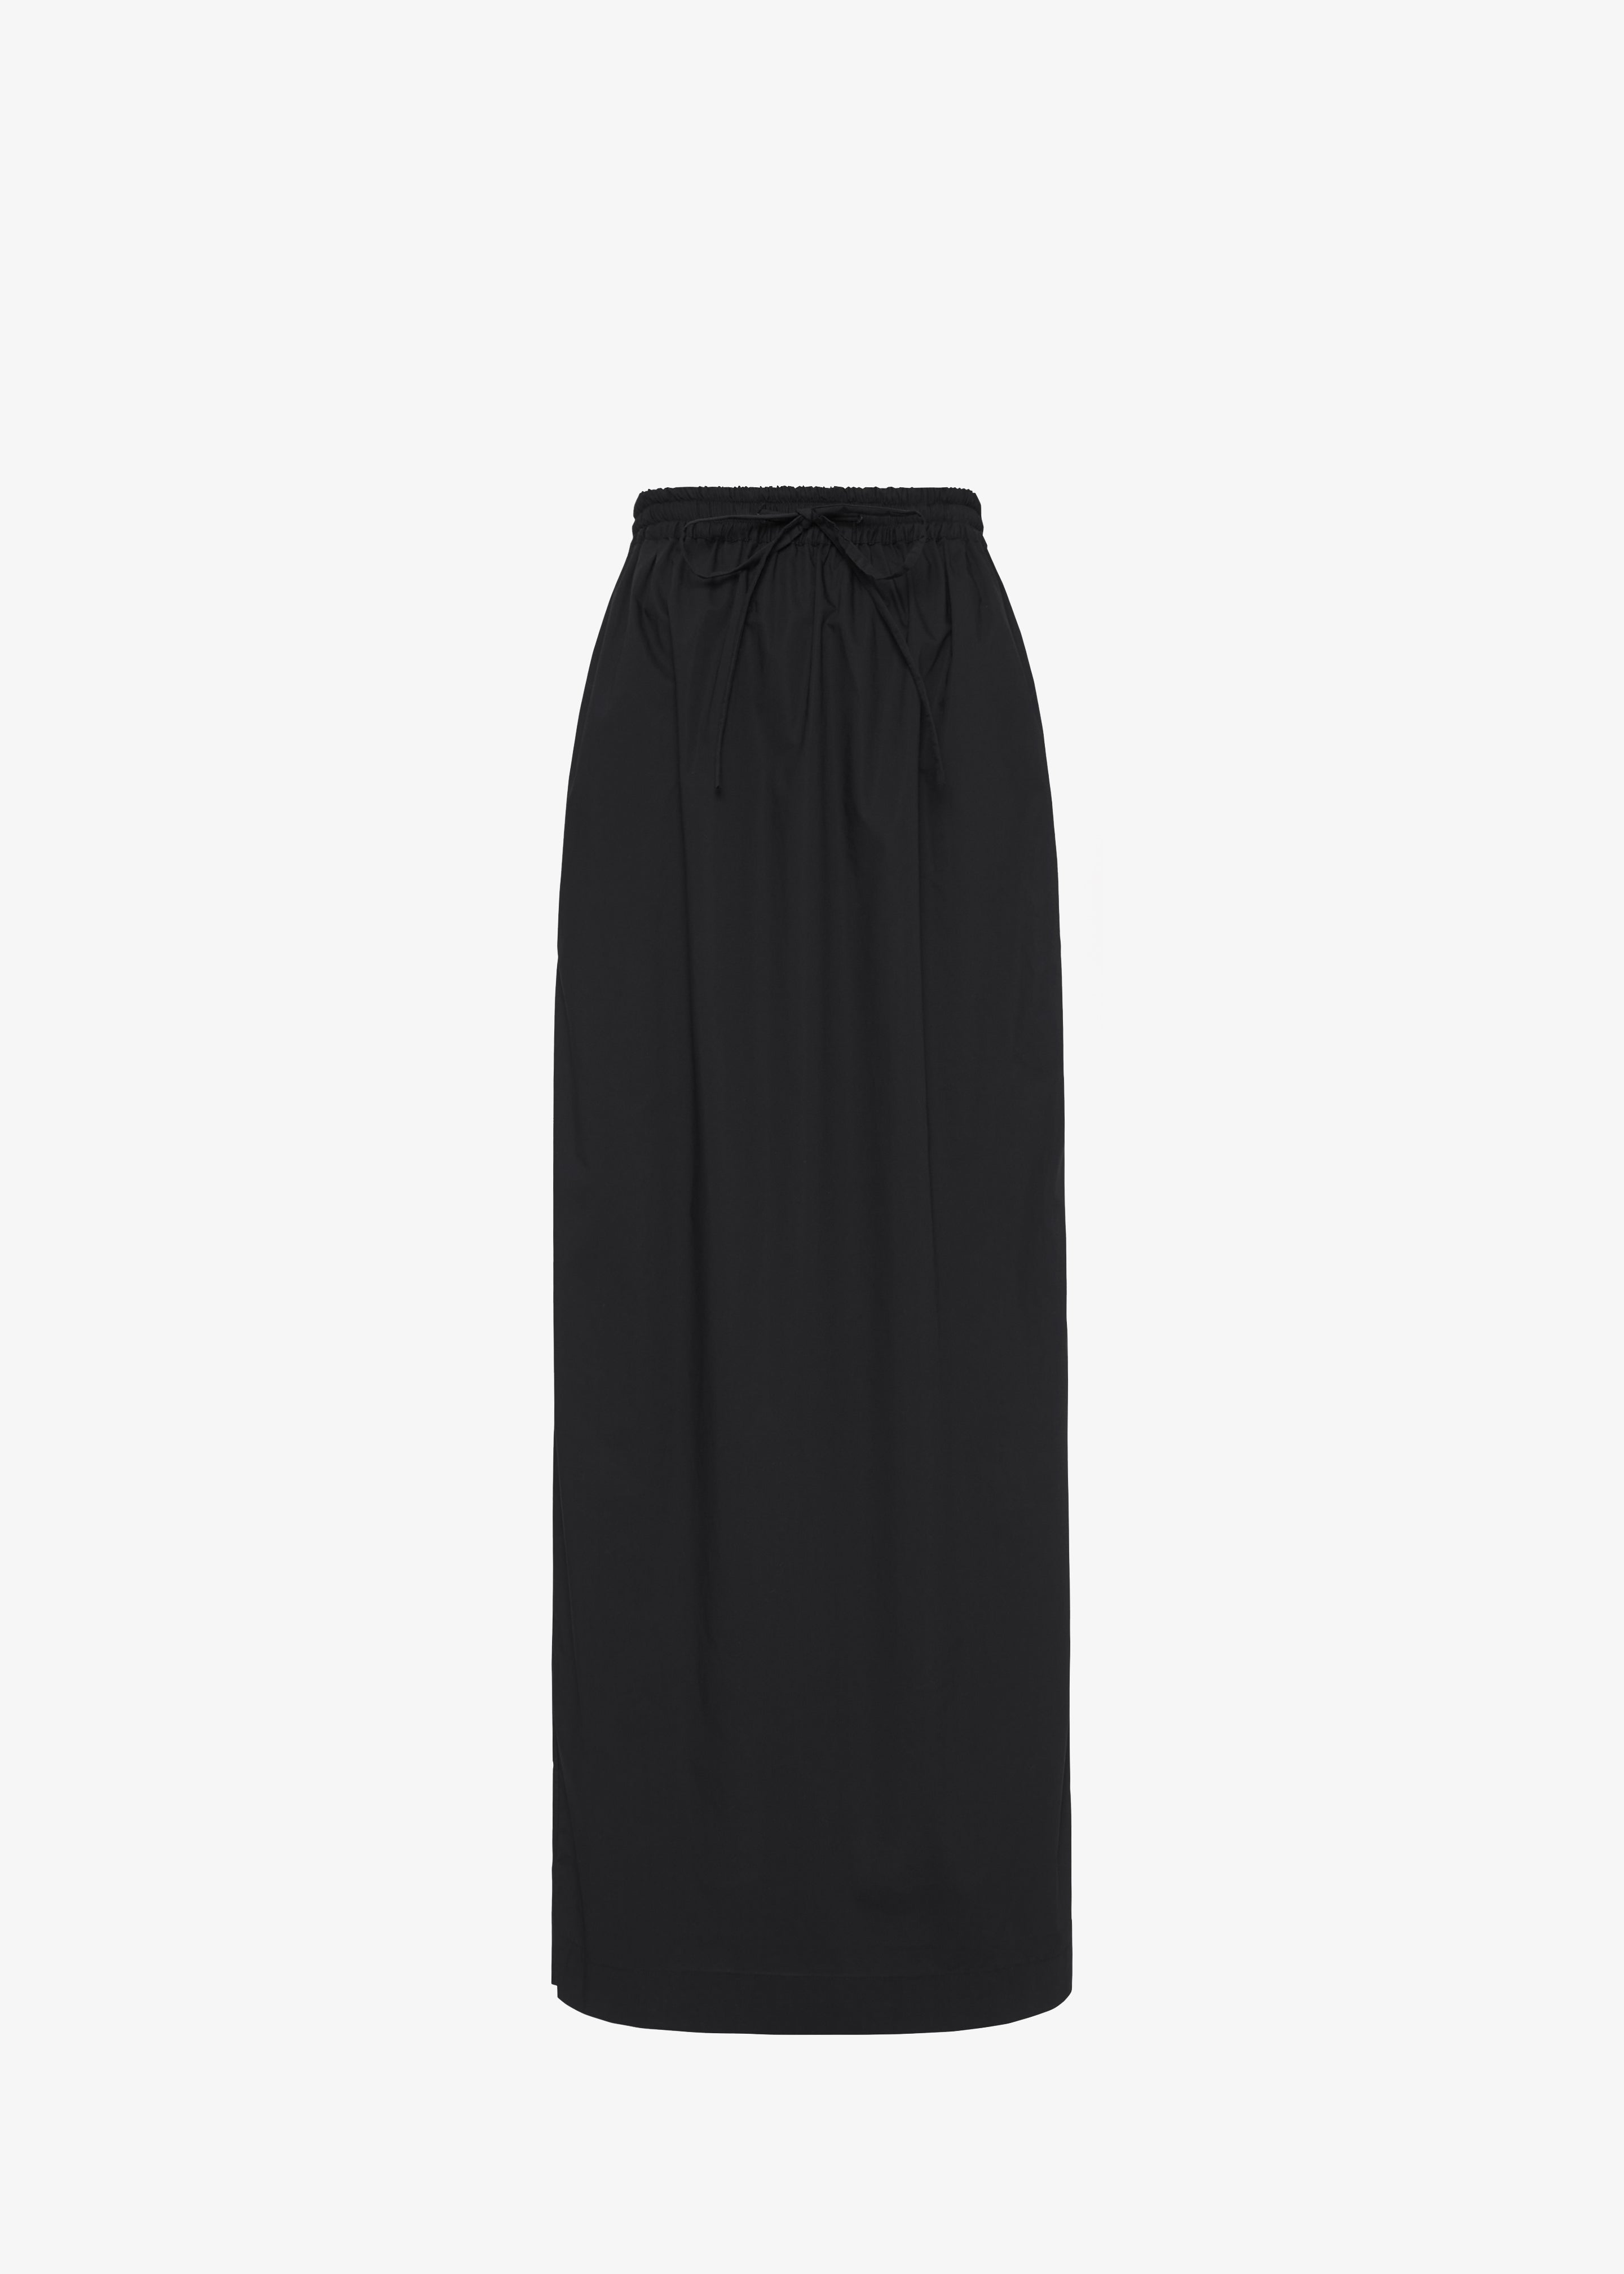 Matteau Relaxed Drawcord Skirt - Black - 8